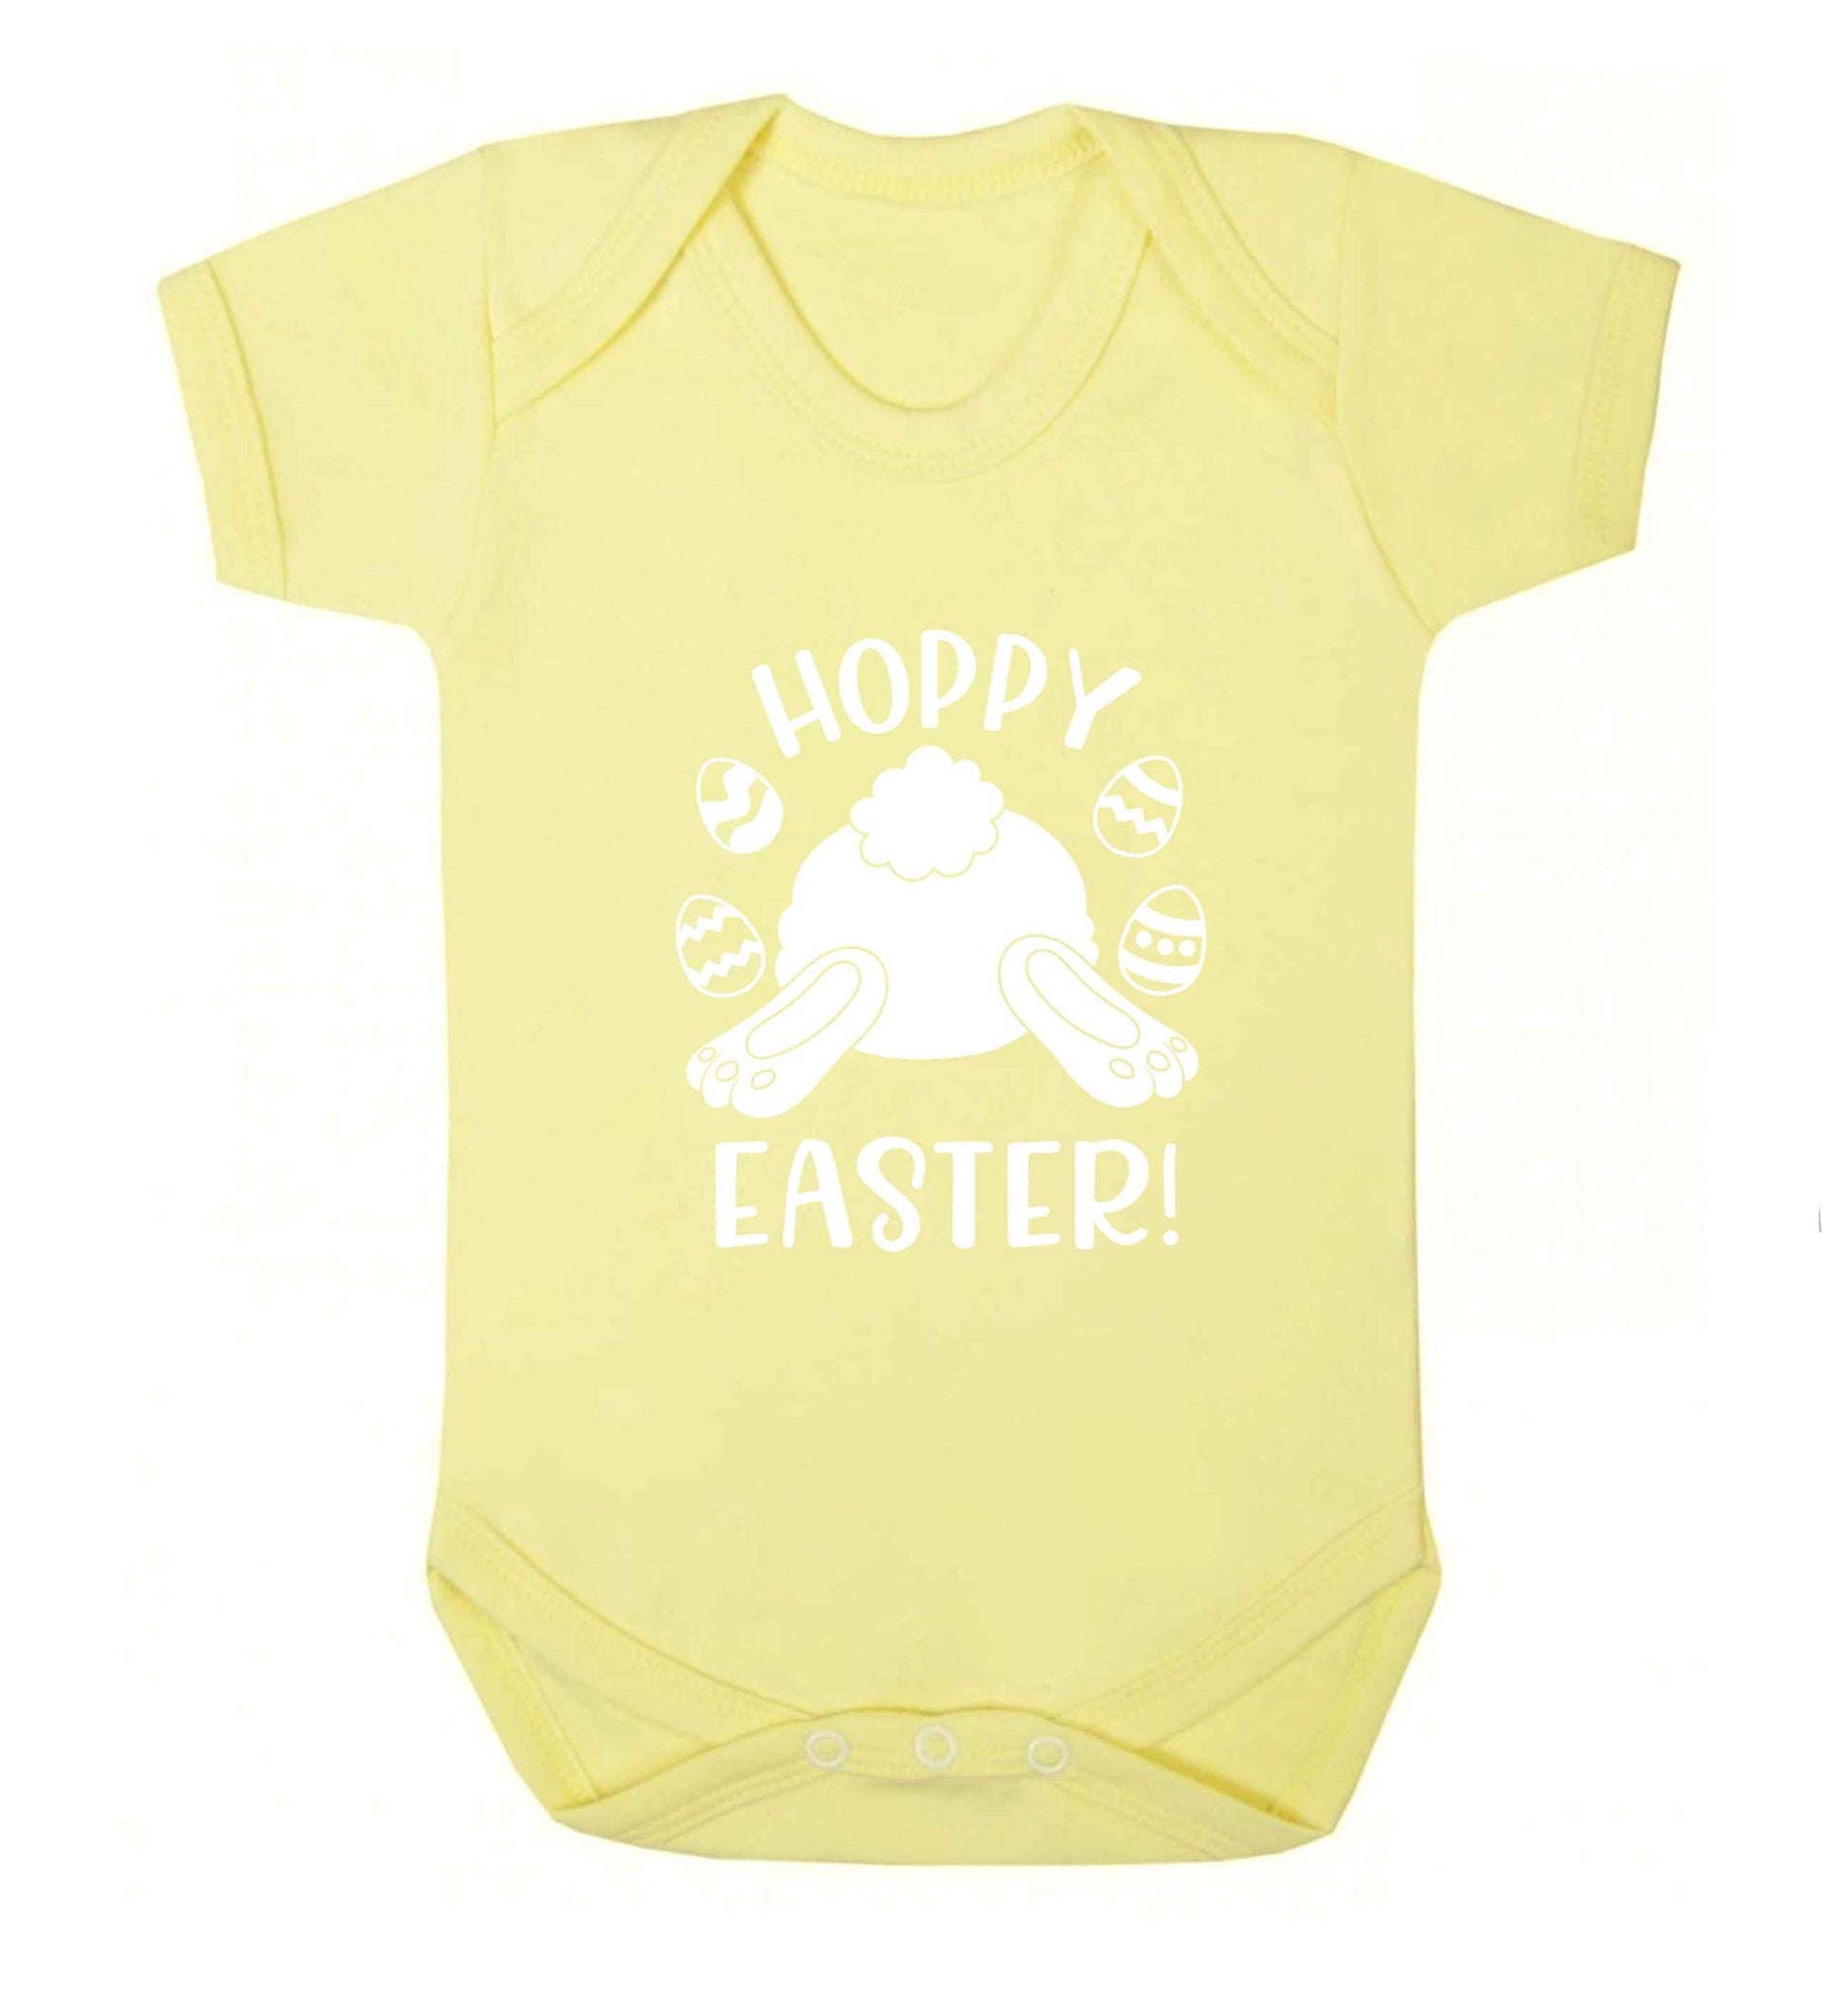 Hoppy Easter baby vest pale yellow 18-24 months